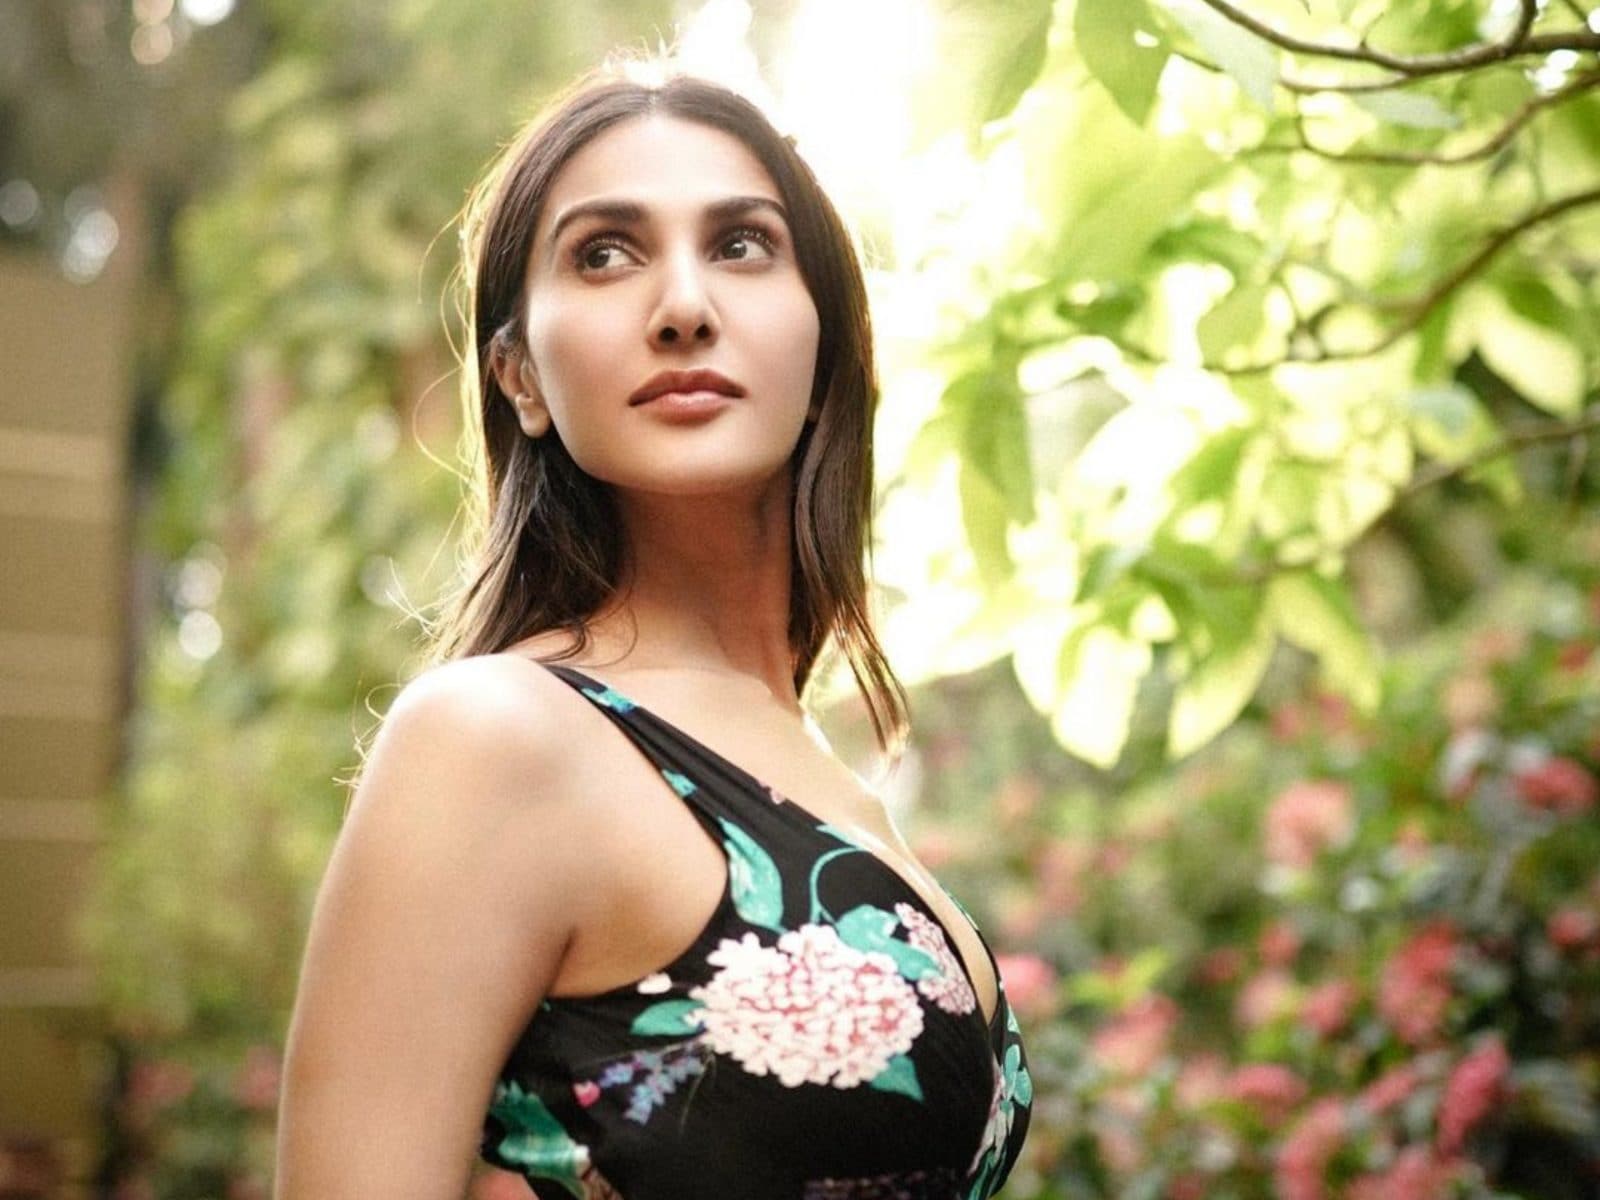 Xx Hd Video Kareena - Vaani Kapoor To Play a Porn Star Look-Alike In Her Upcoming Movie? Here's  What We Know - News18